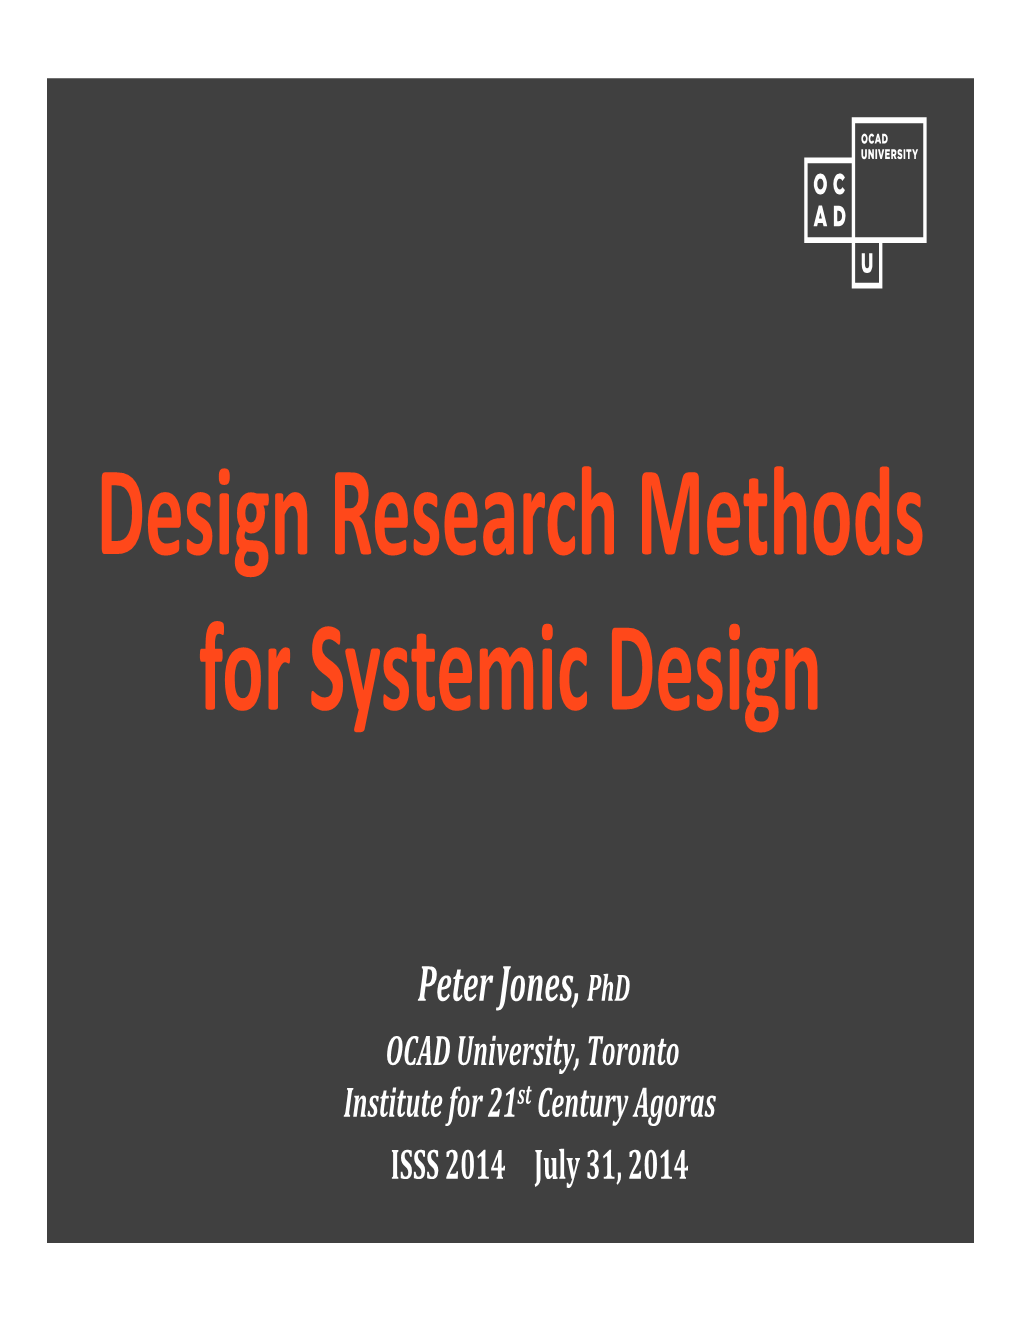 Design Research Methods for Systemic Design